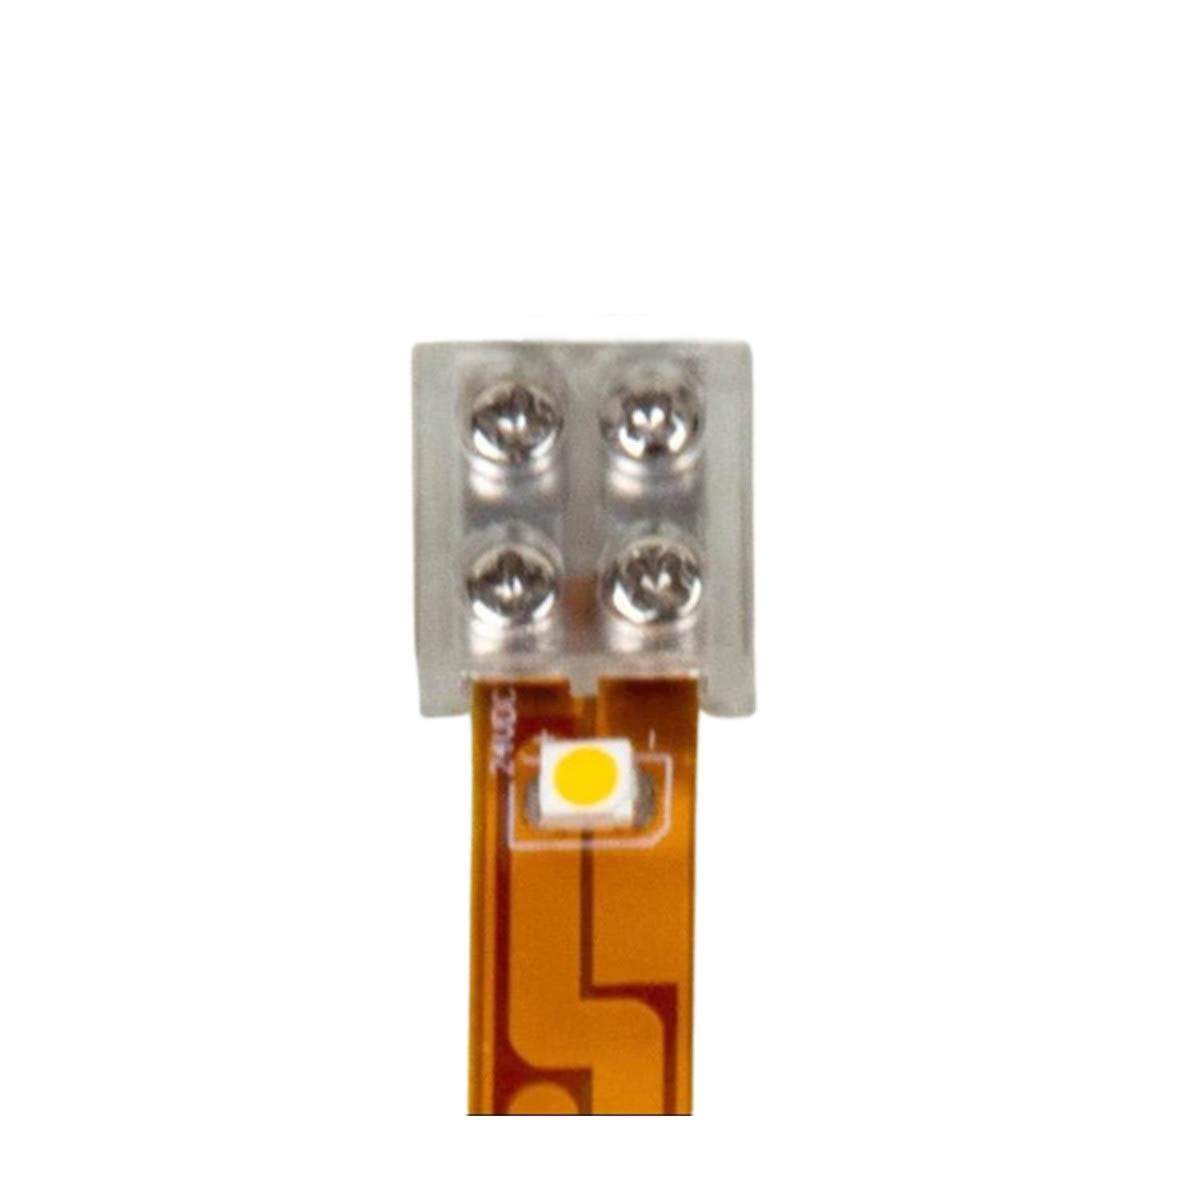 Sure-Tite Tape to Power Supply Connector (No Wire) for LTR-E Tape Light Series